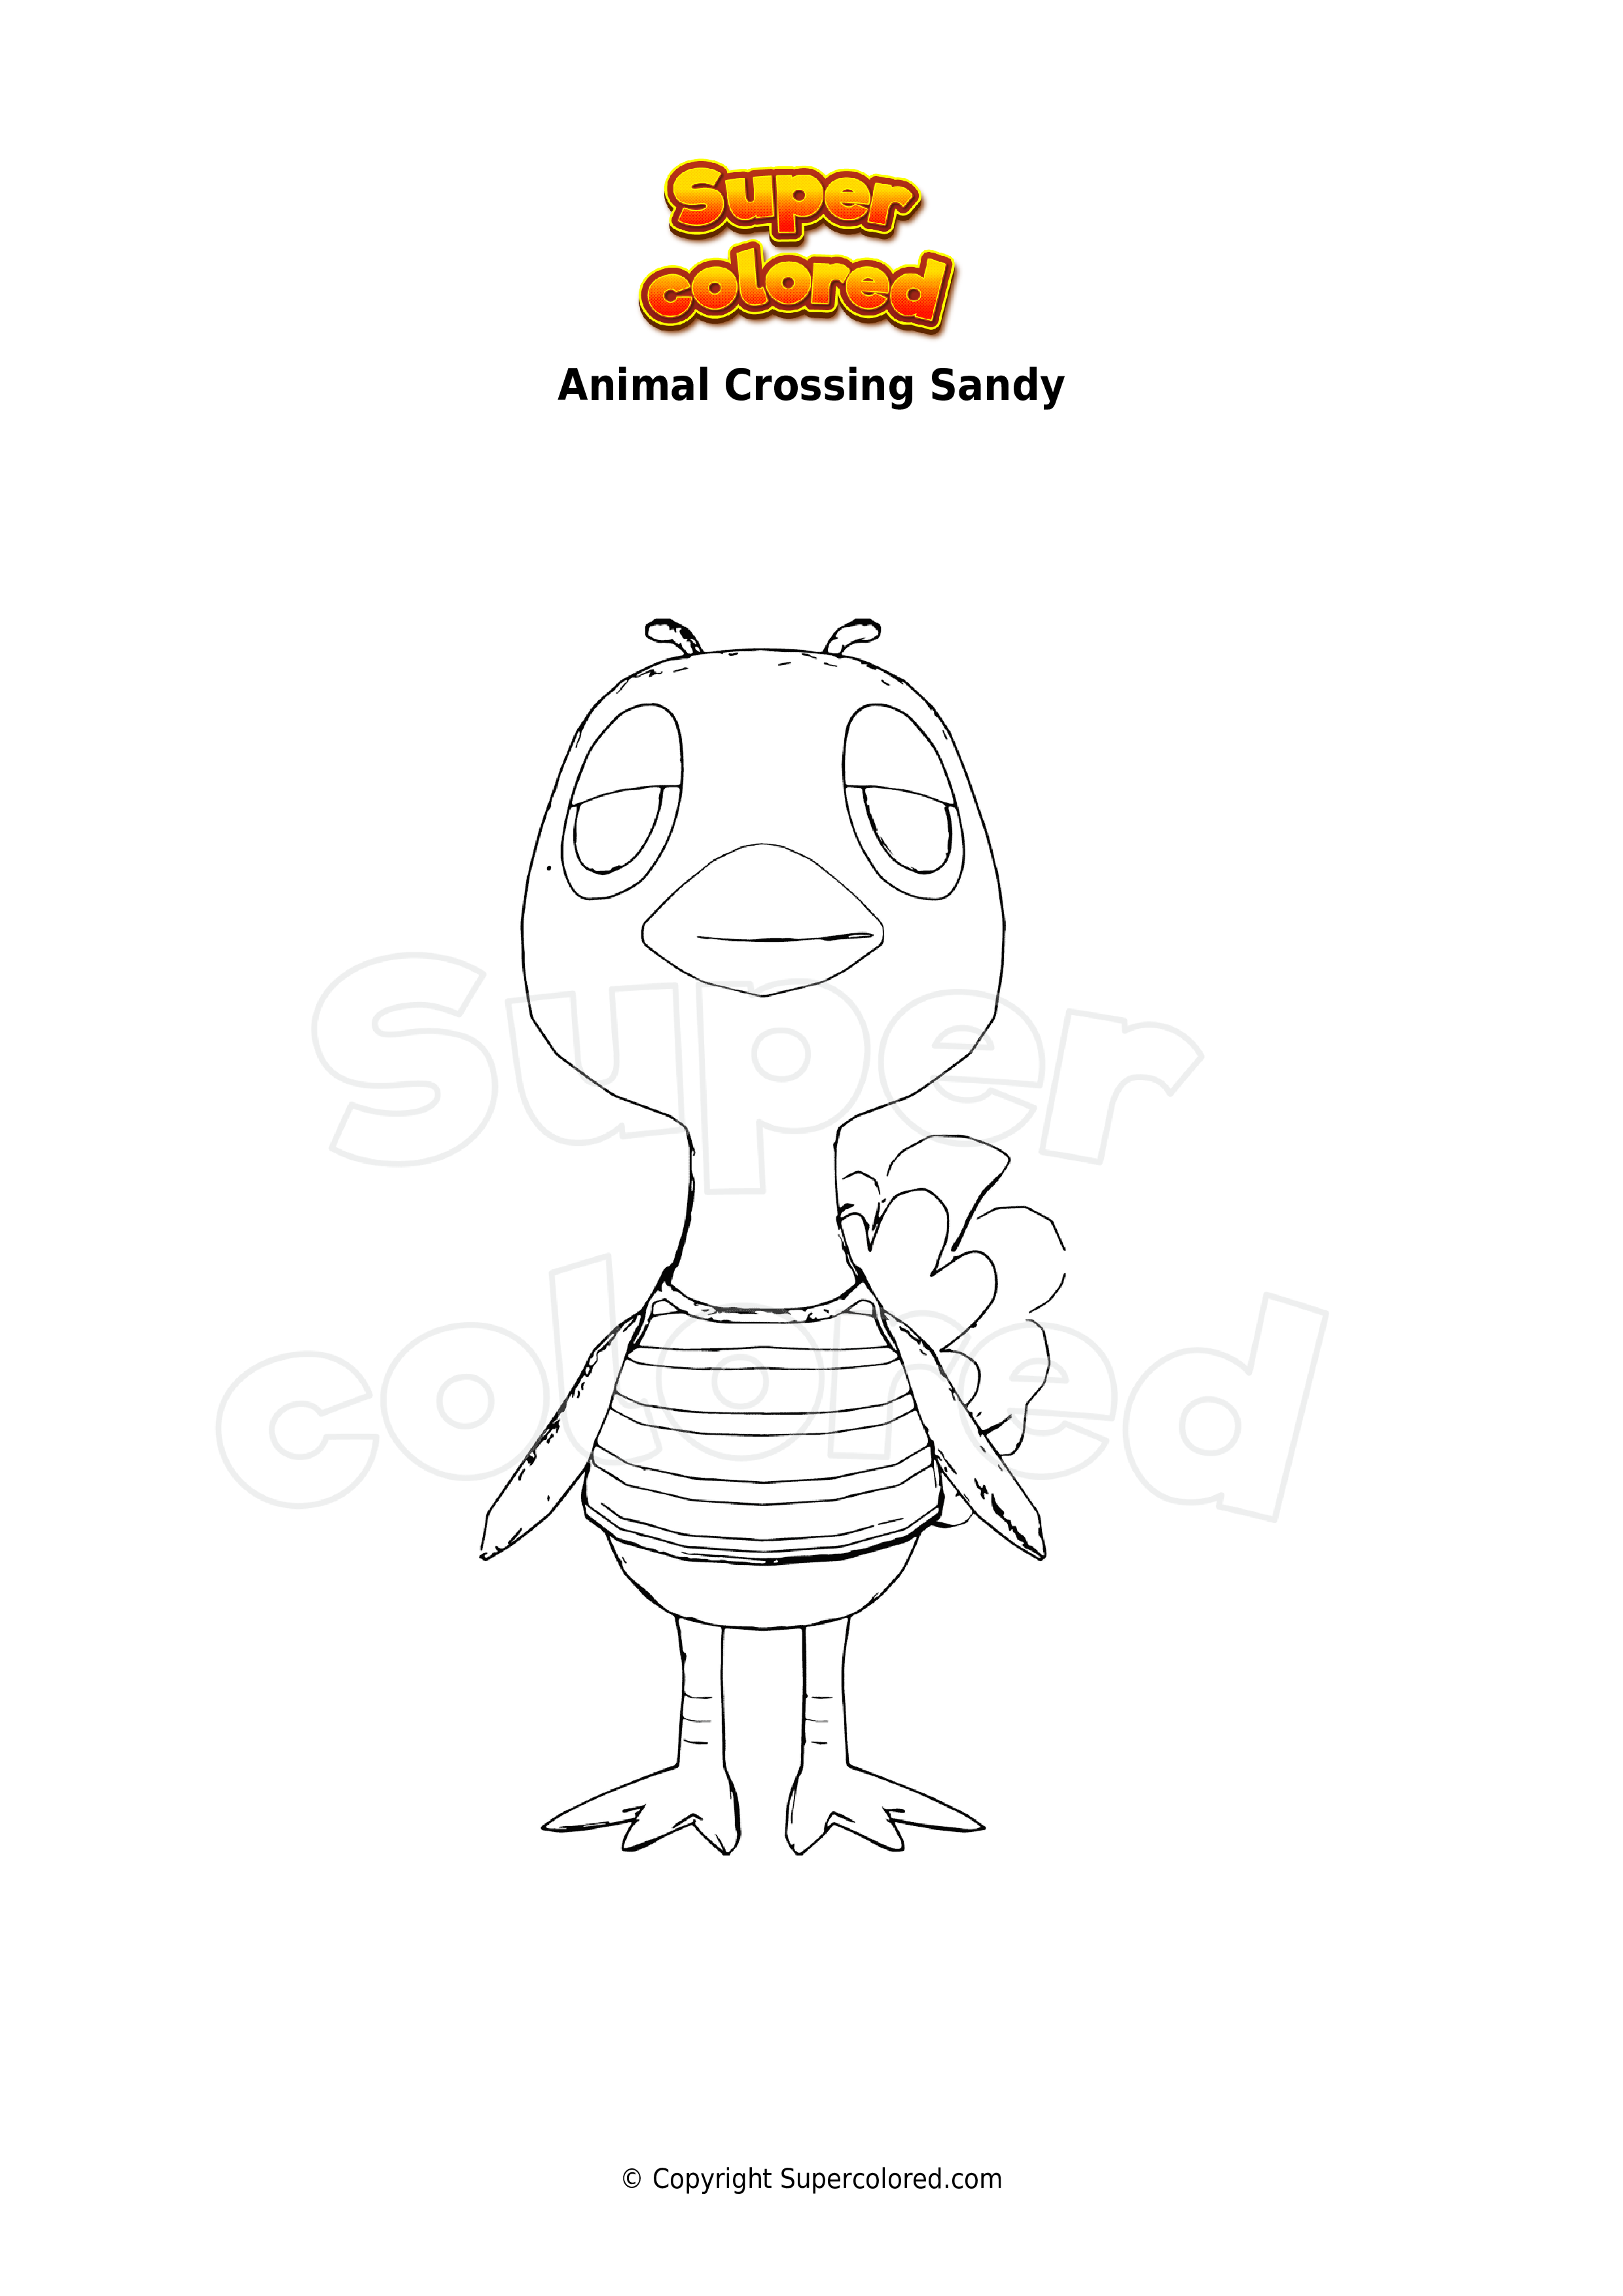 Coloring page Animal Crossing Sandy 